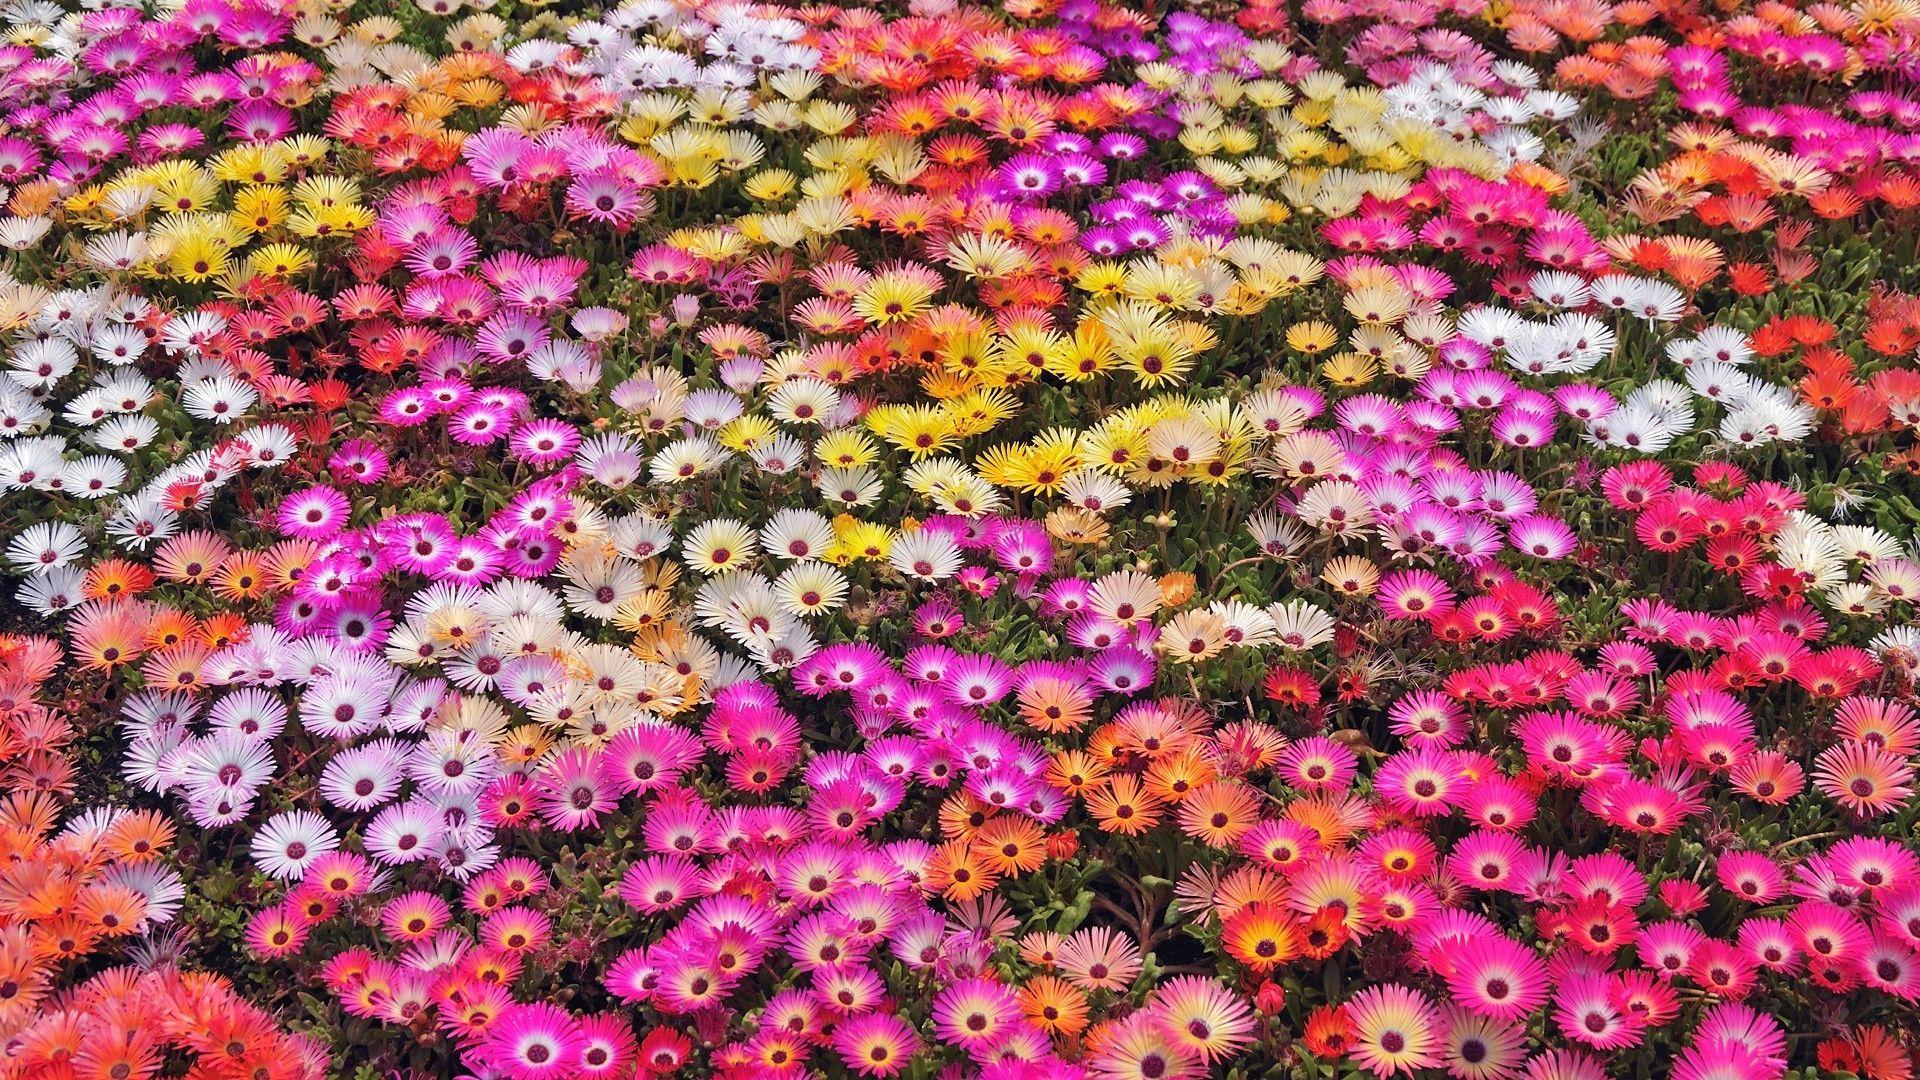 Colorful Flowers Wallpaper HD